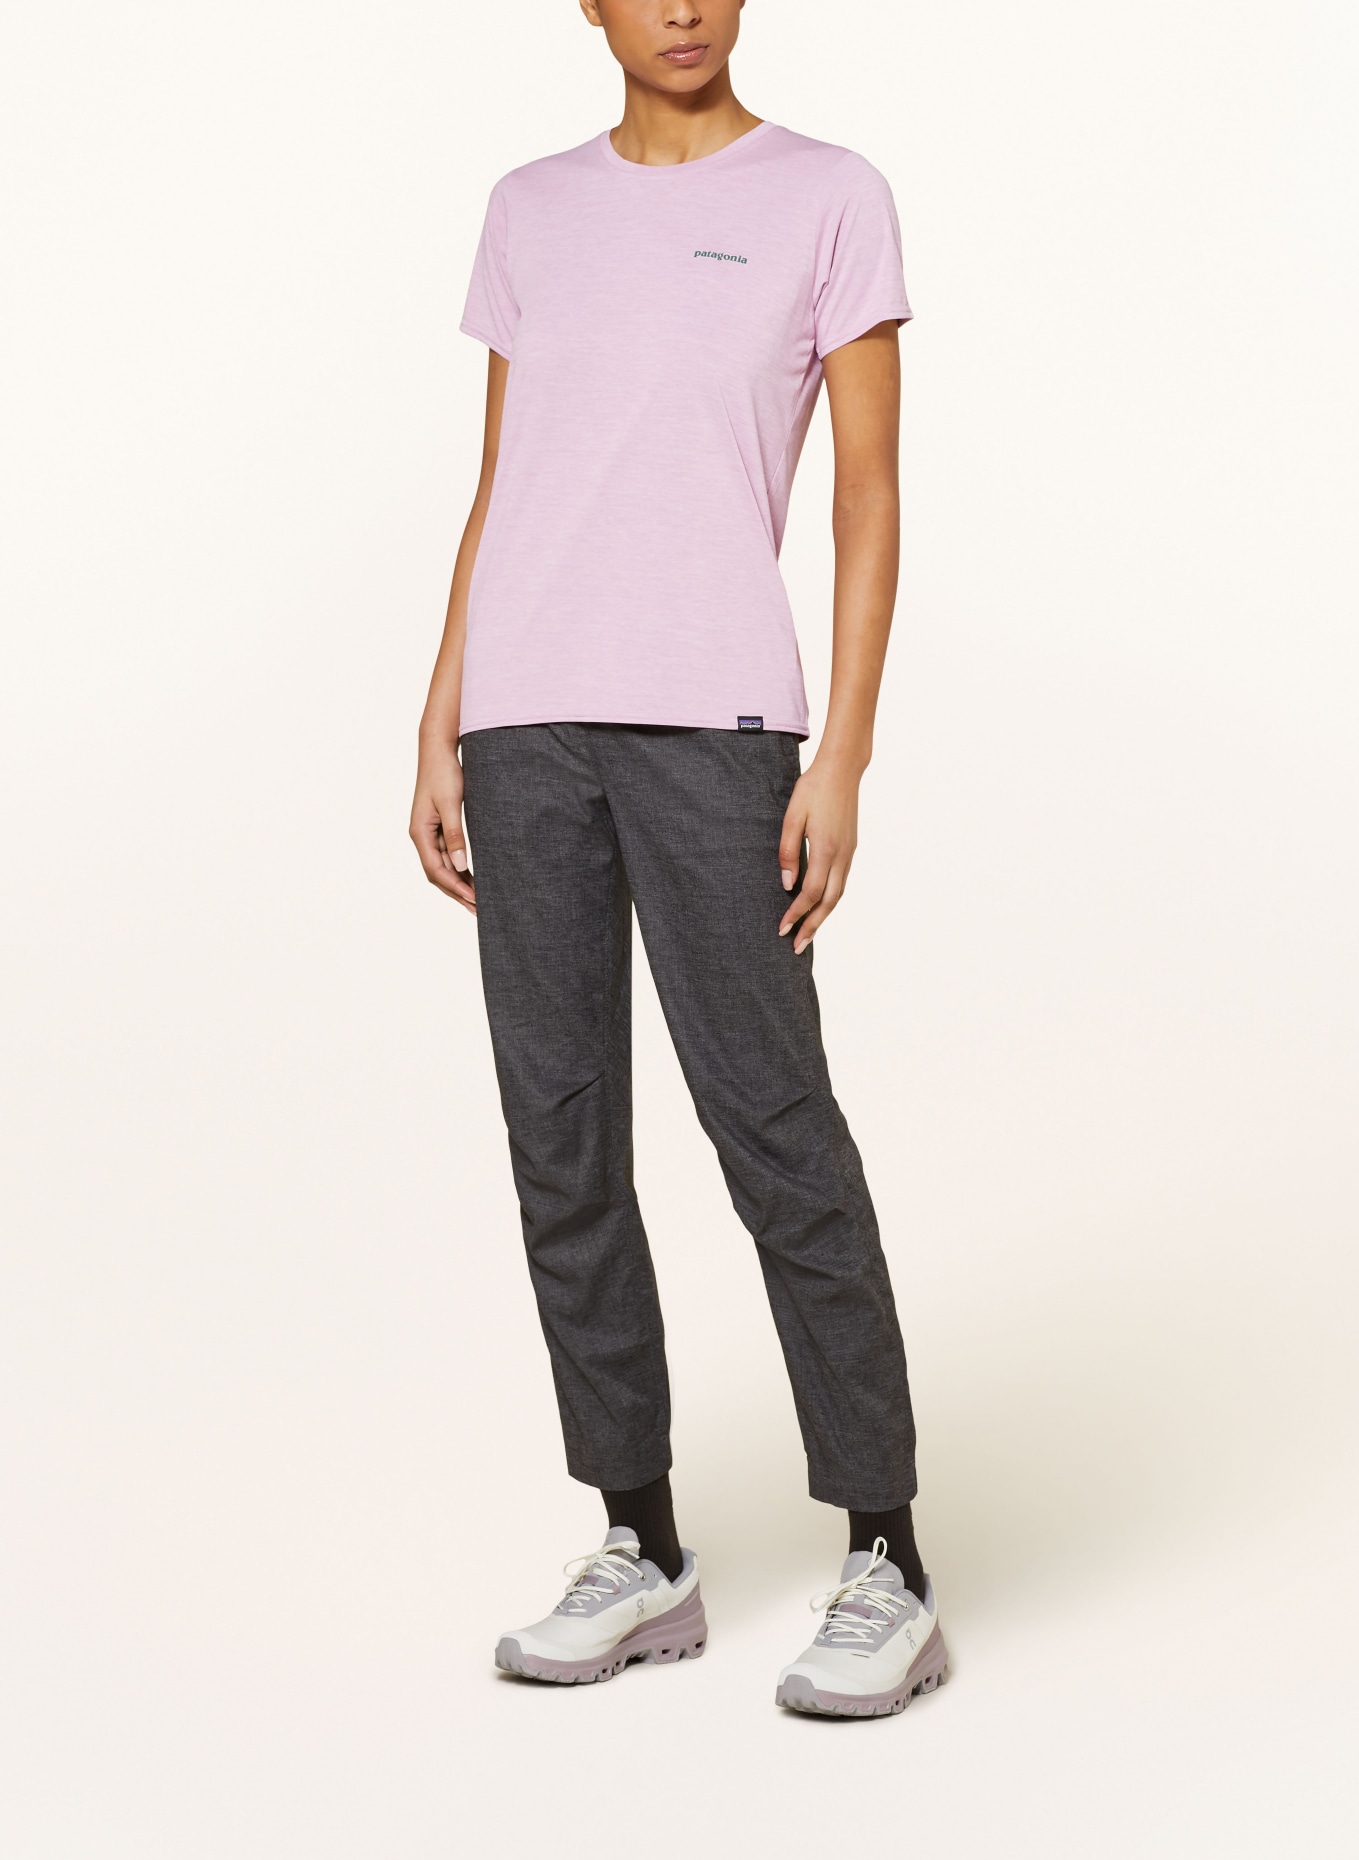 patagonia T-shirt COOL DAILY, Color: PINK (Image 3)